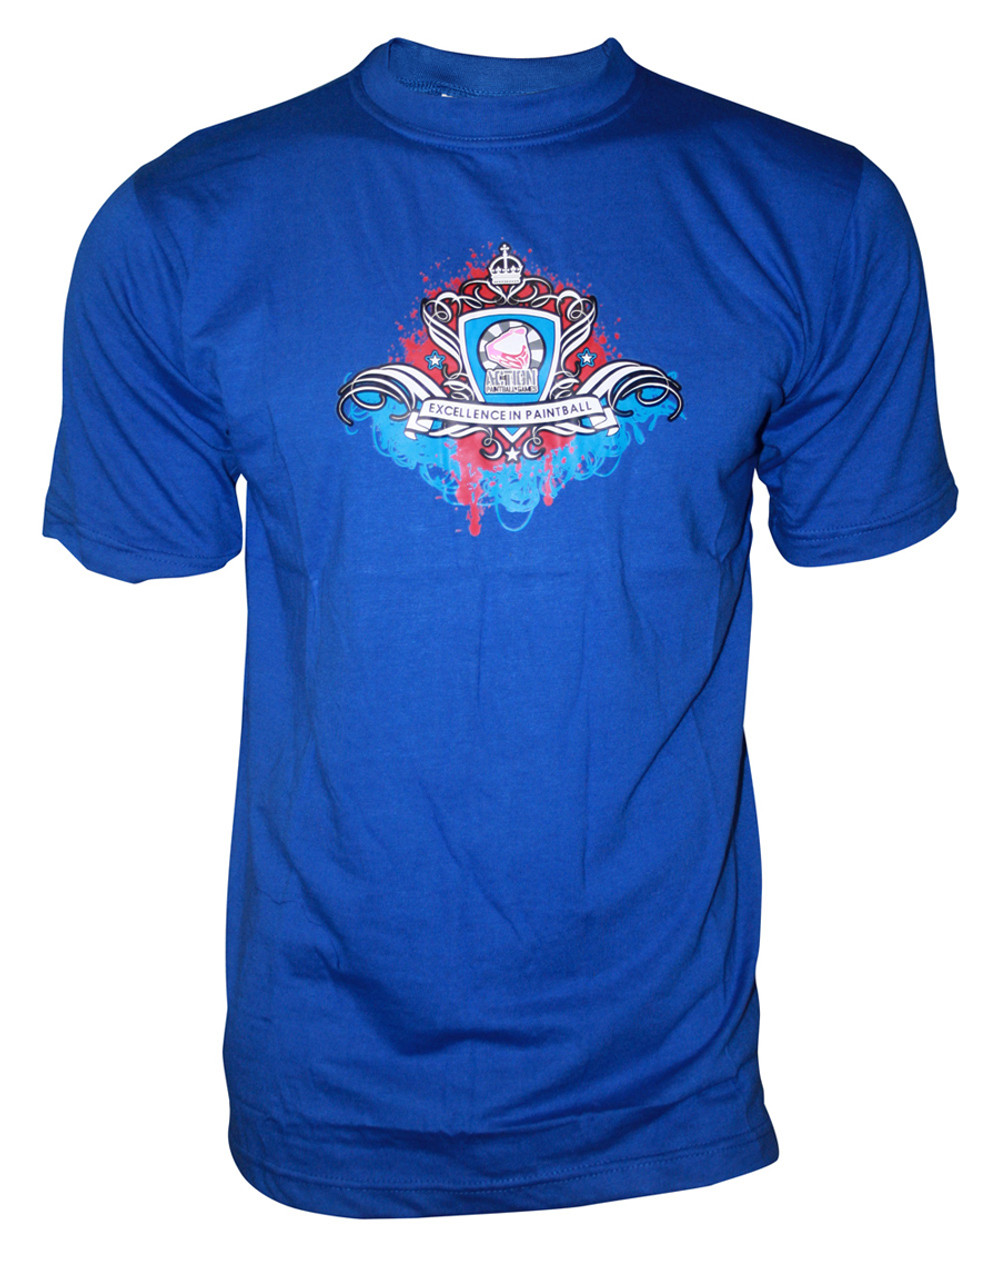 Action Paintball Games - Tshirt - Crown - Blue